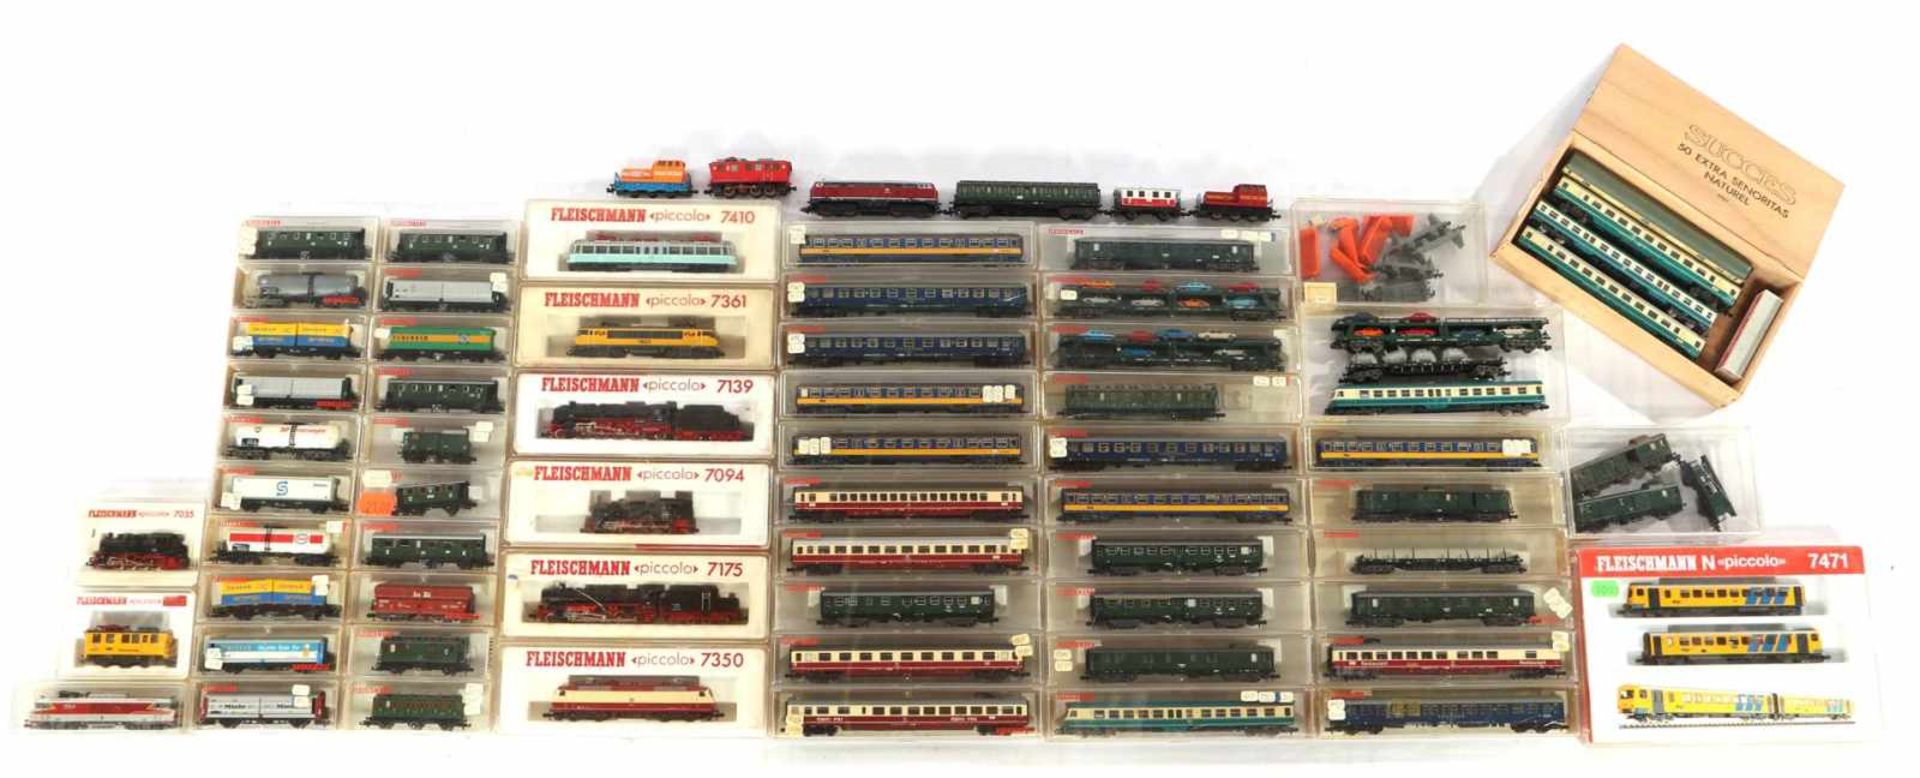 79 Fleischmann Gauge N trains, wagons and locomotives, most of them with box